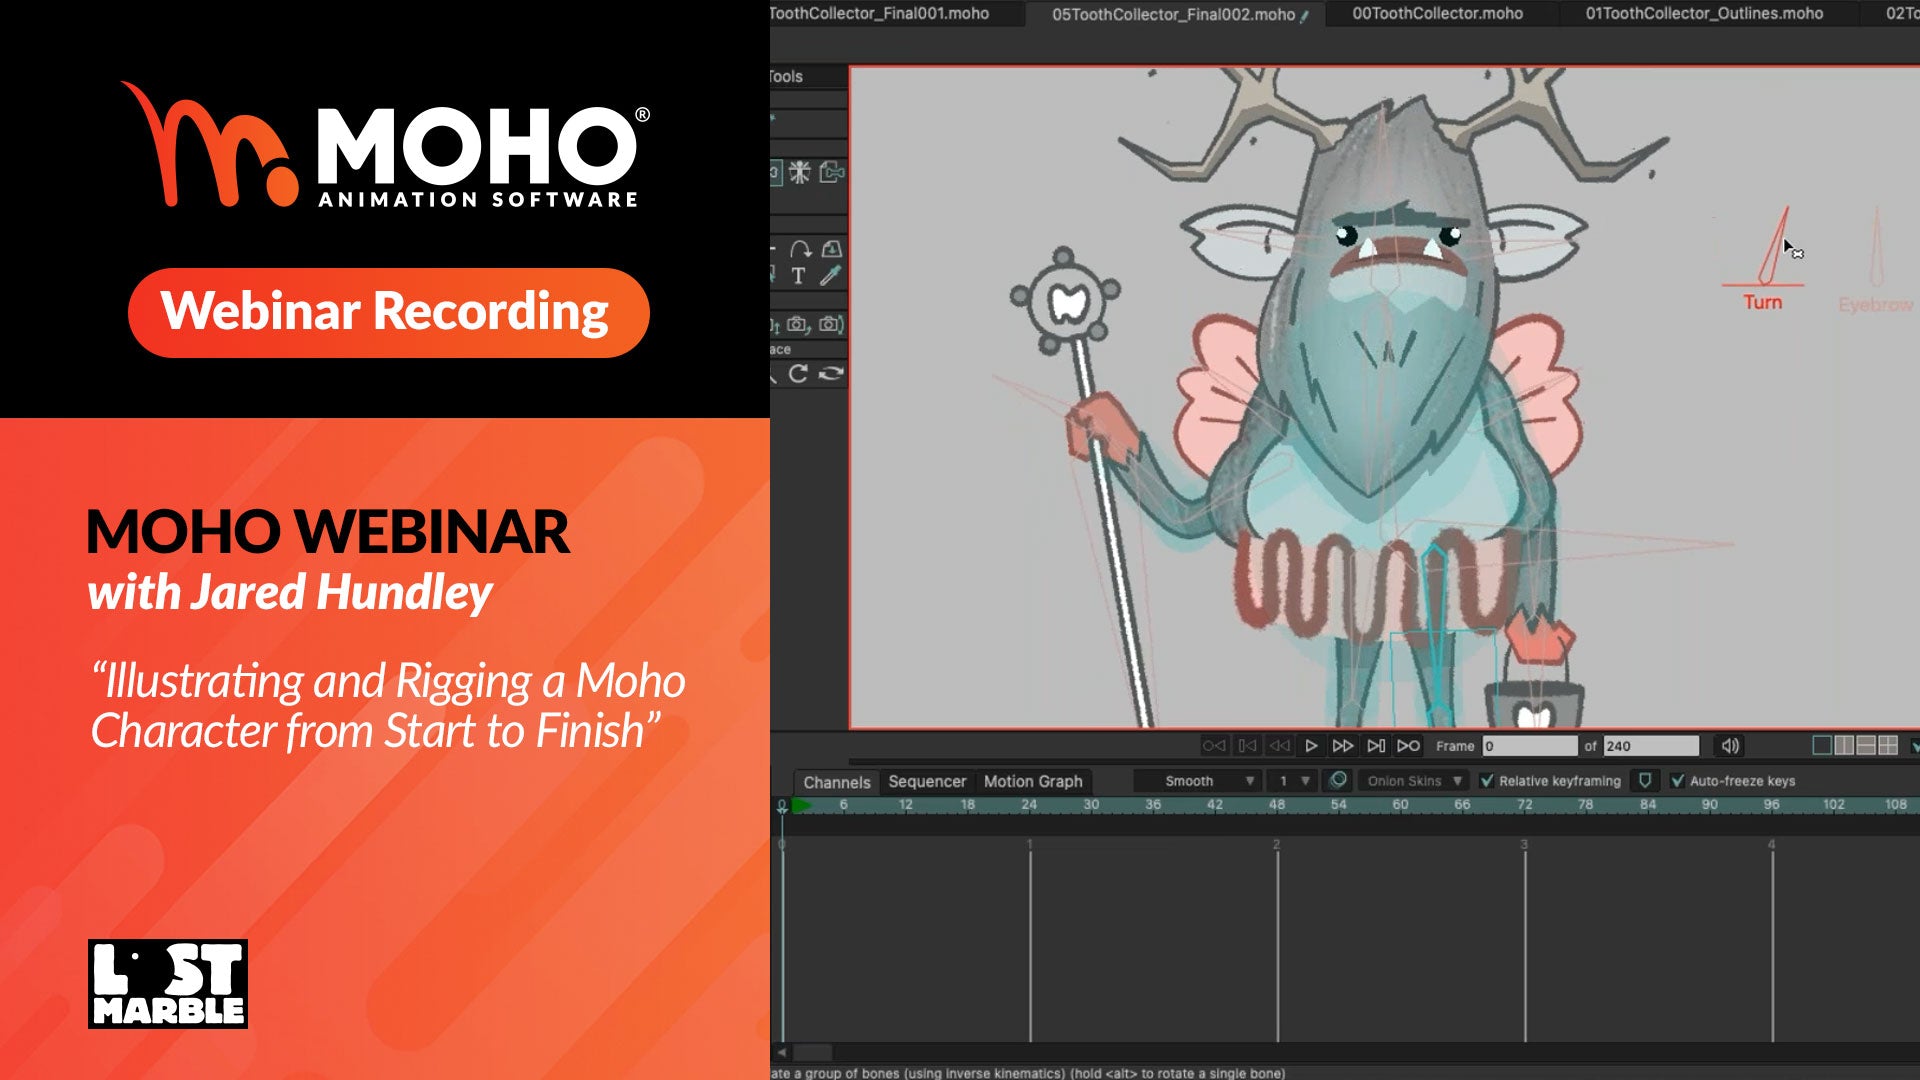 Webinar recording: Illustrating and Rigging a Moho Character from Start to Finish with Jared Hundley